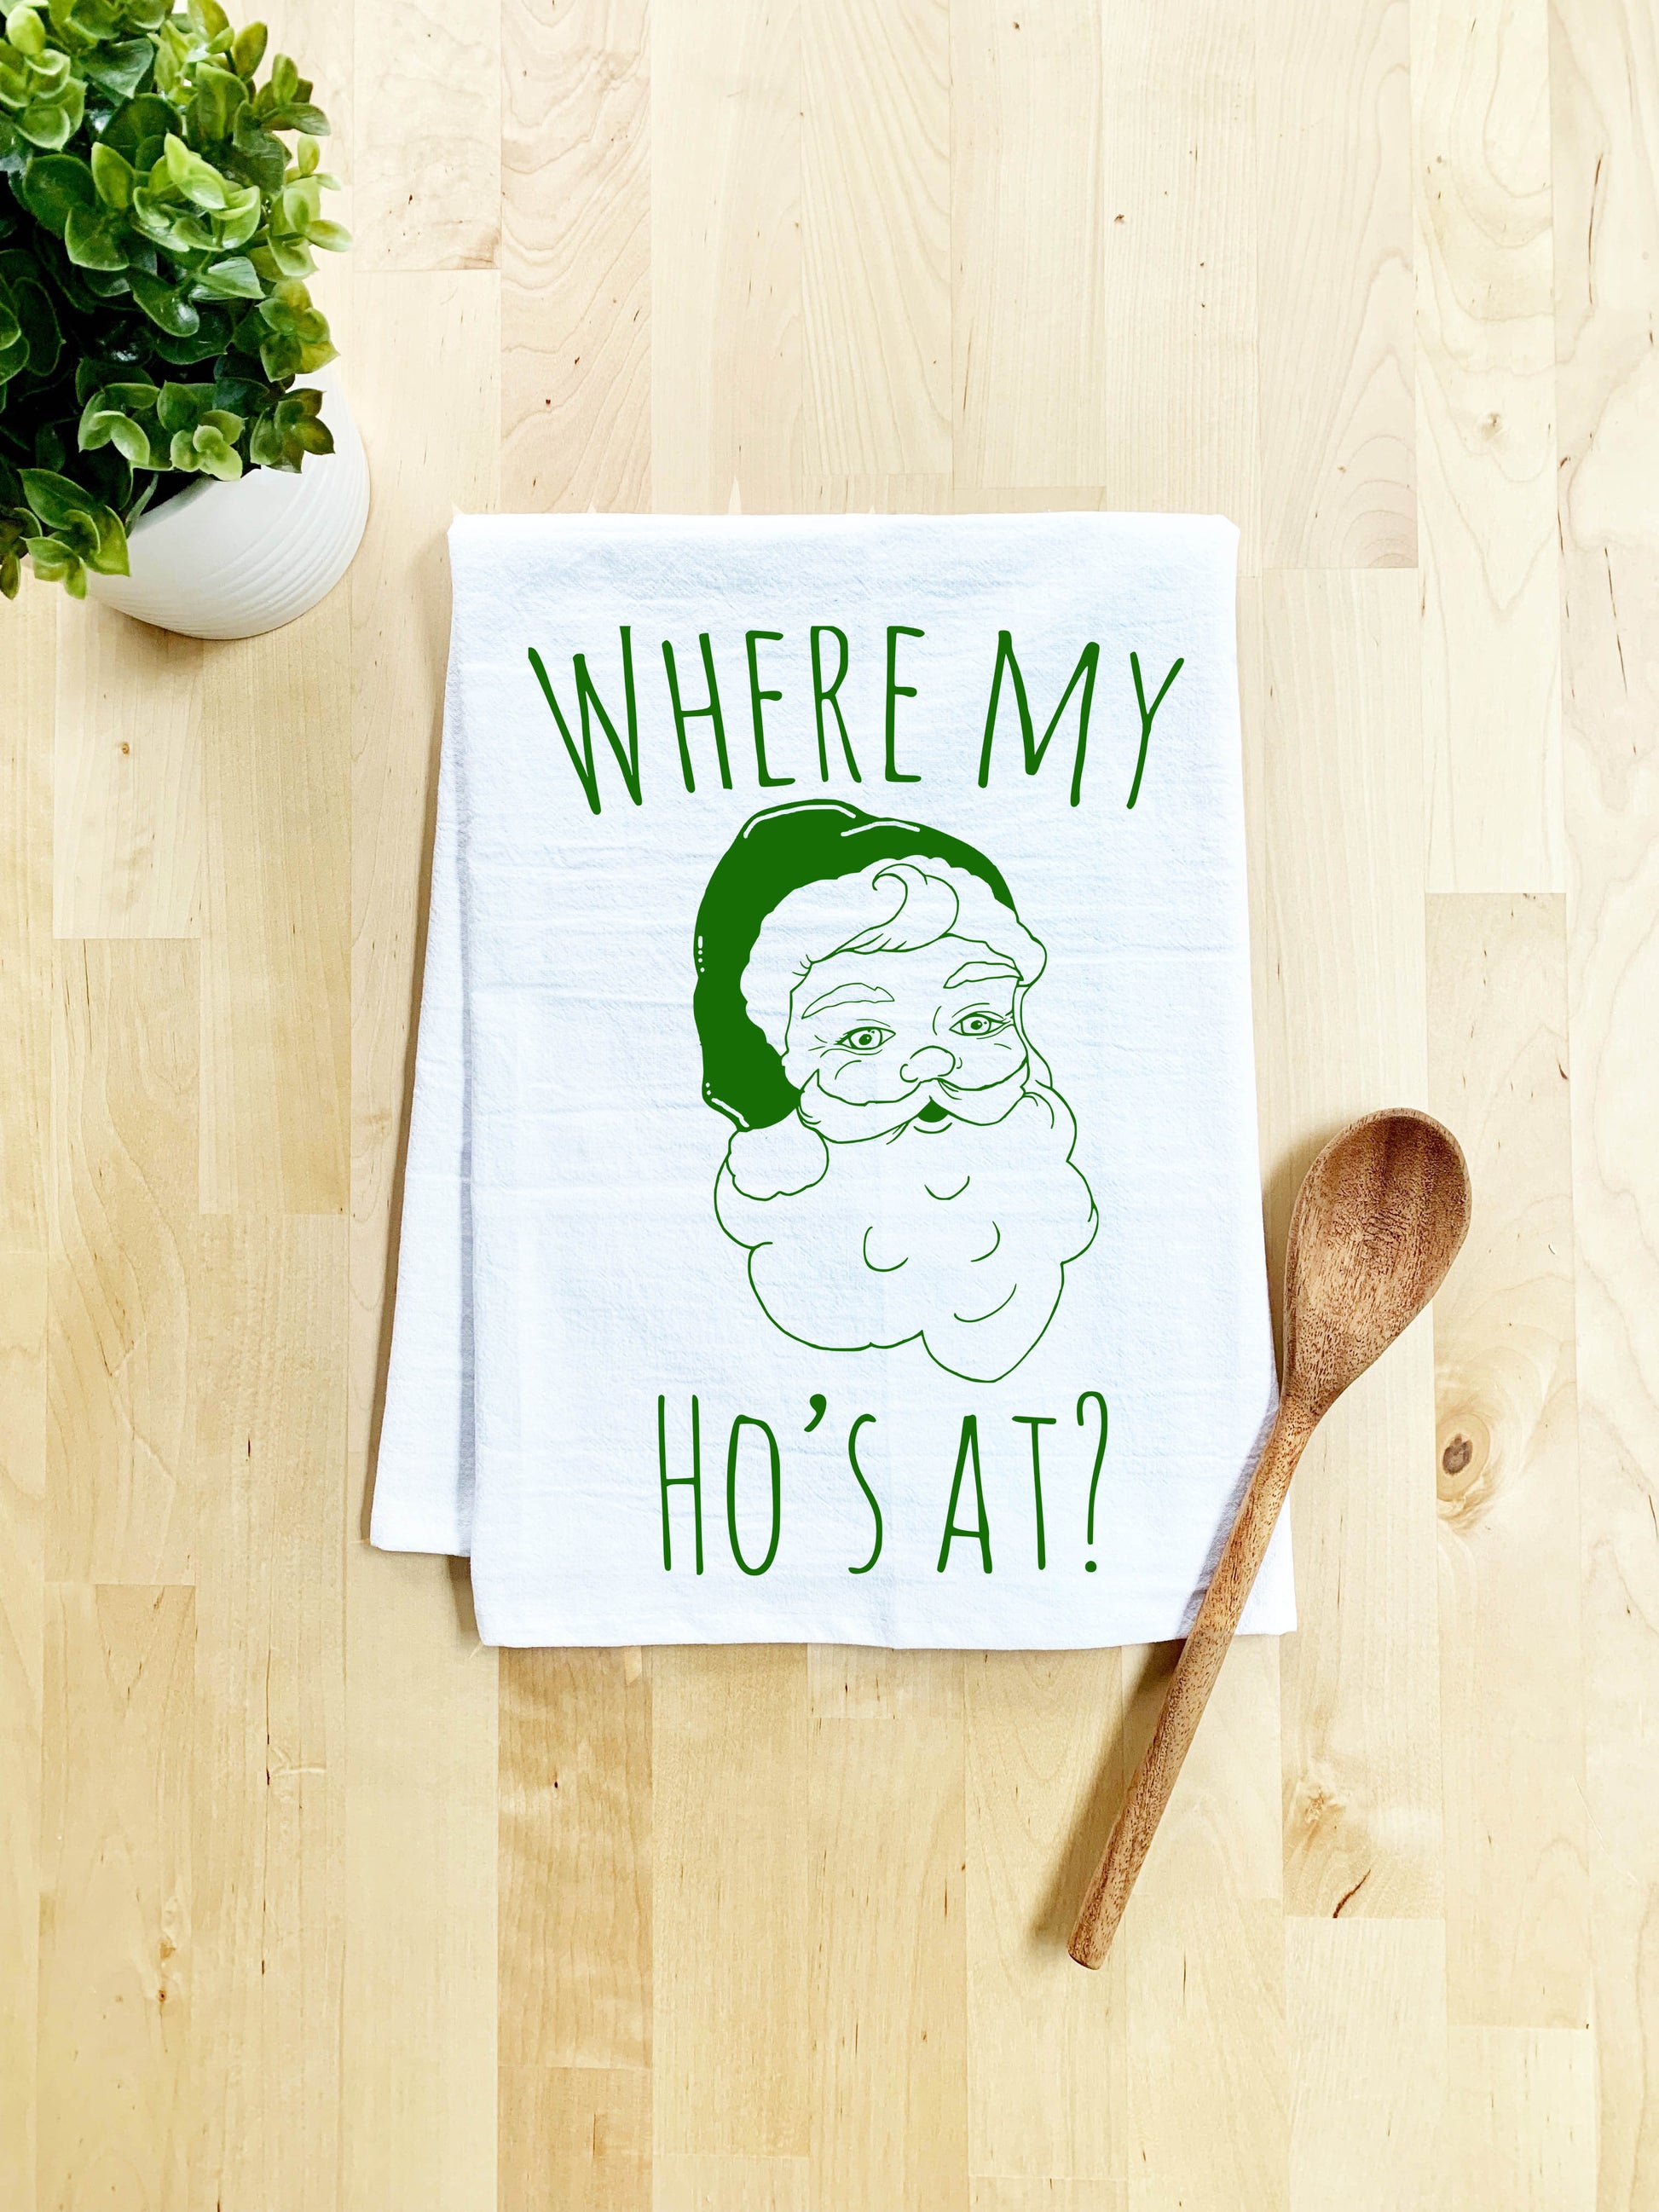 Where My Ho's At? Dish Towel - White - MoonlightMakers